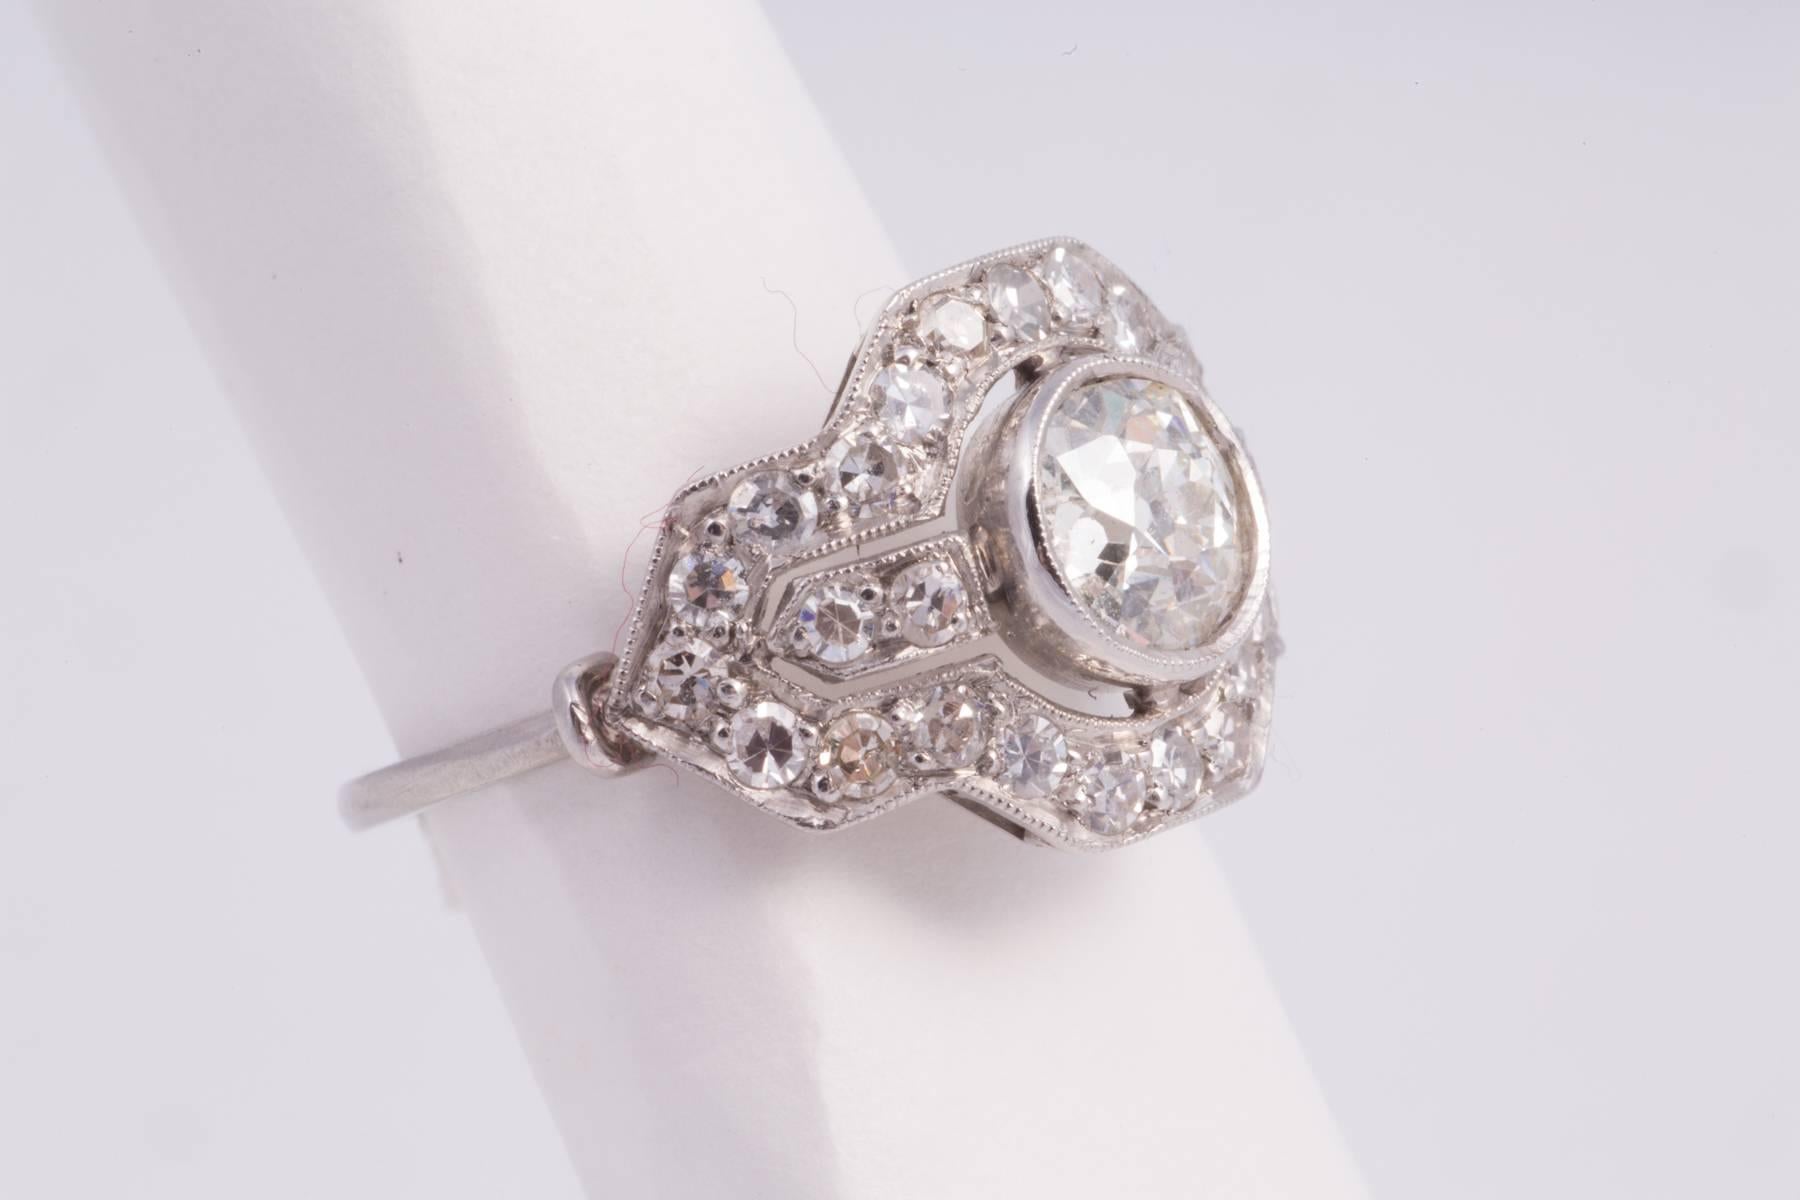 Platinum and diamond ring, The center diamond is european cut and weighs approx. 1.00ct having I-J color and SI clarity. There are 30 single cut diamonds weighing approx. 1.00cts with H-I color and VS clarity, circa. 1930